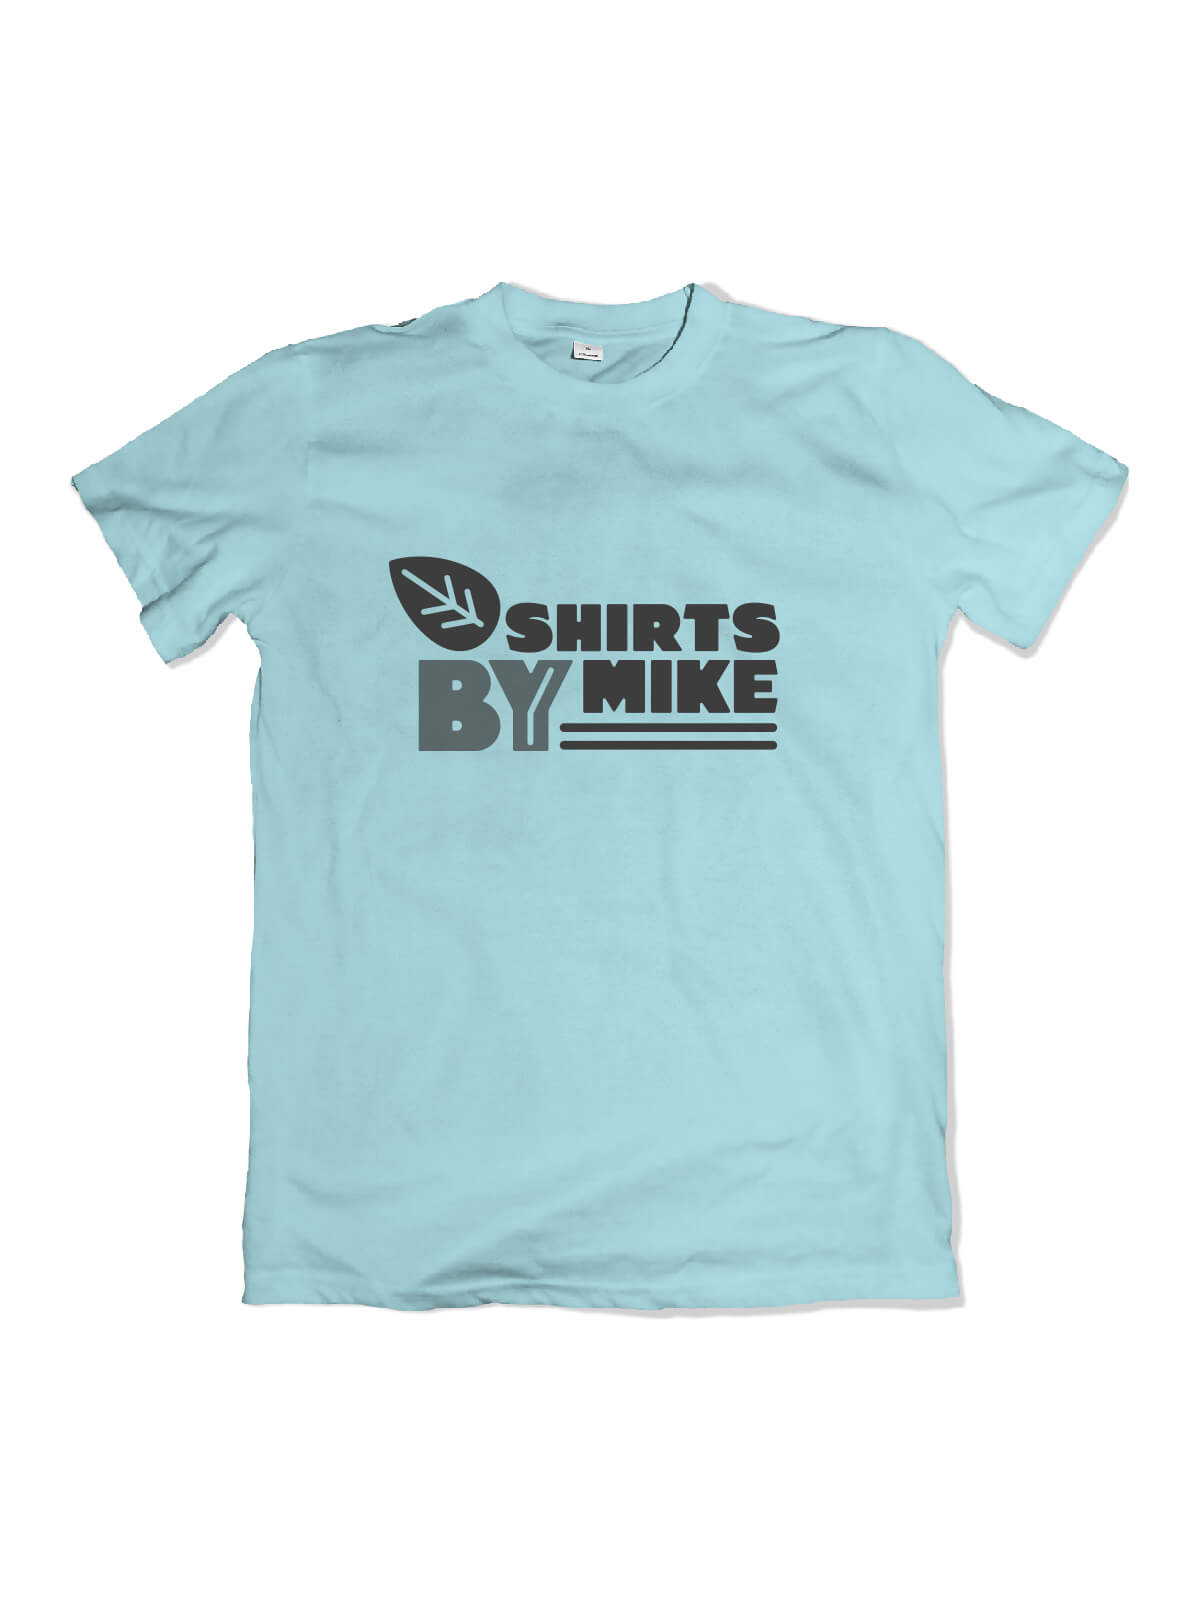 sky t-shirt with Shirts By Mike logo